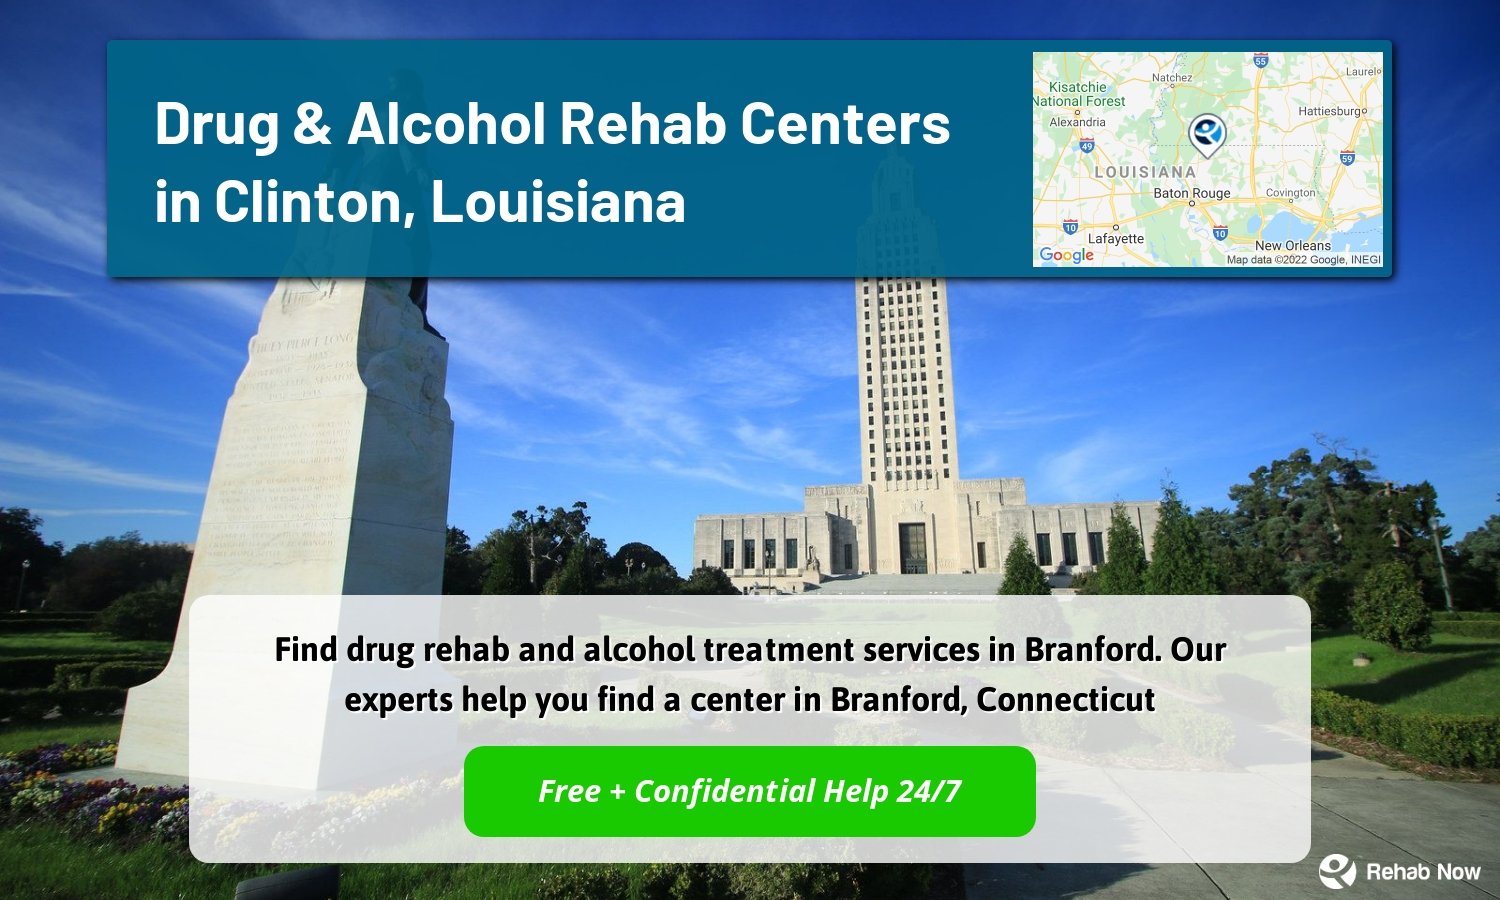 Find drug rehab and alcohol treatment services in Branford. Our experts help you find a center in Branford, Connecticut